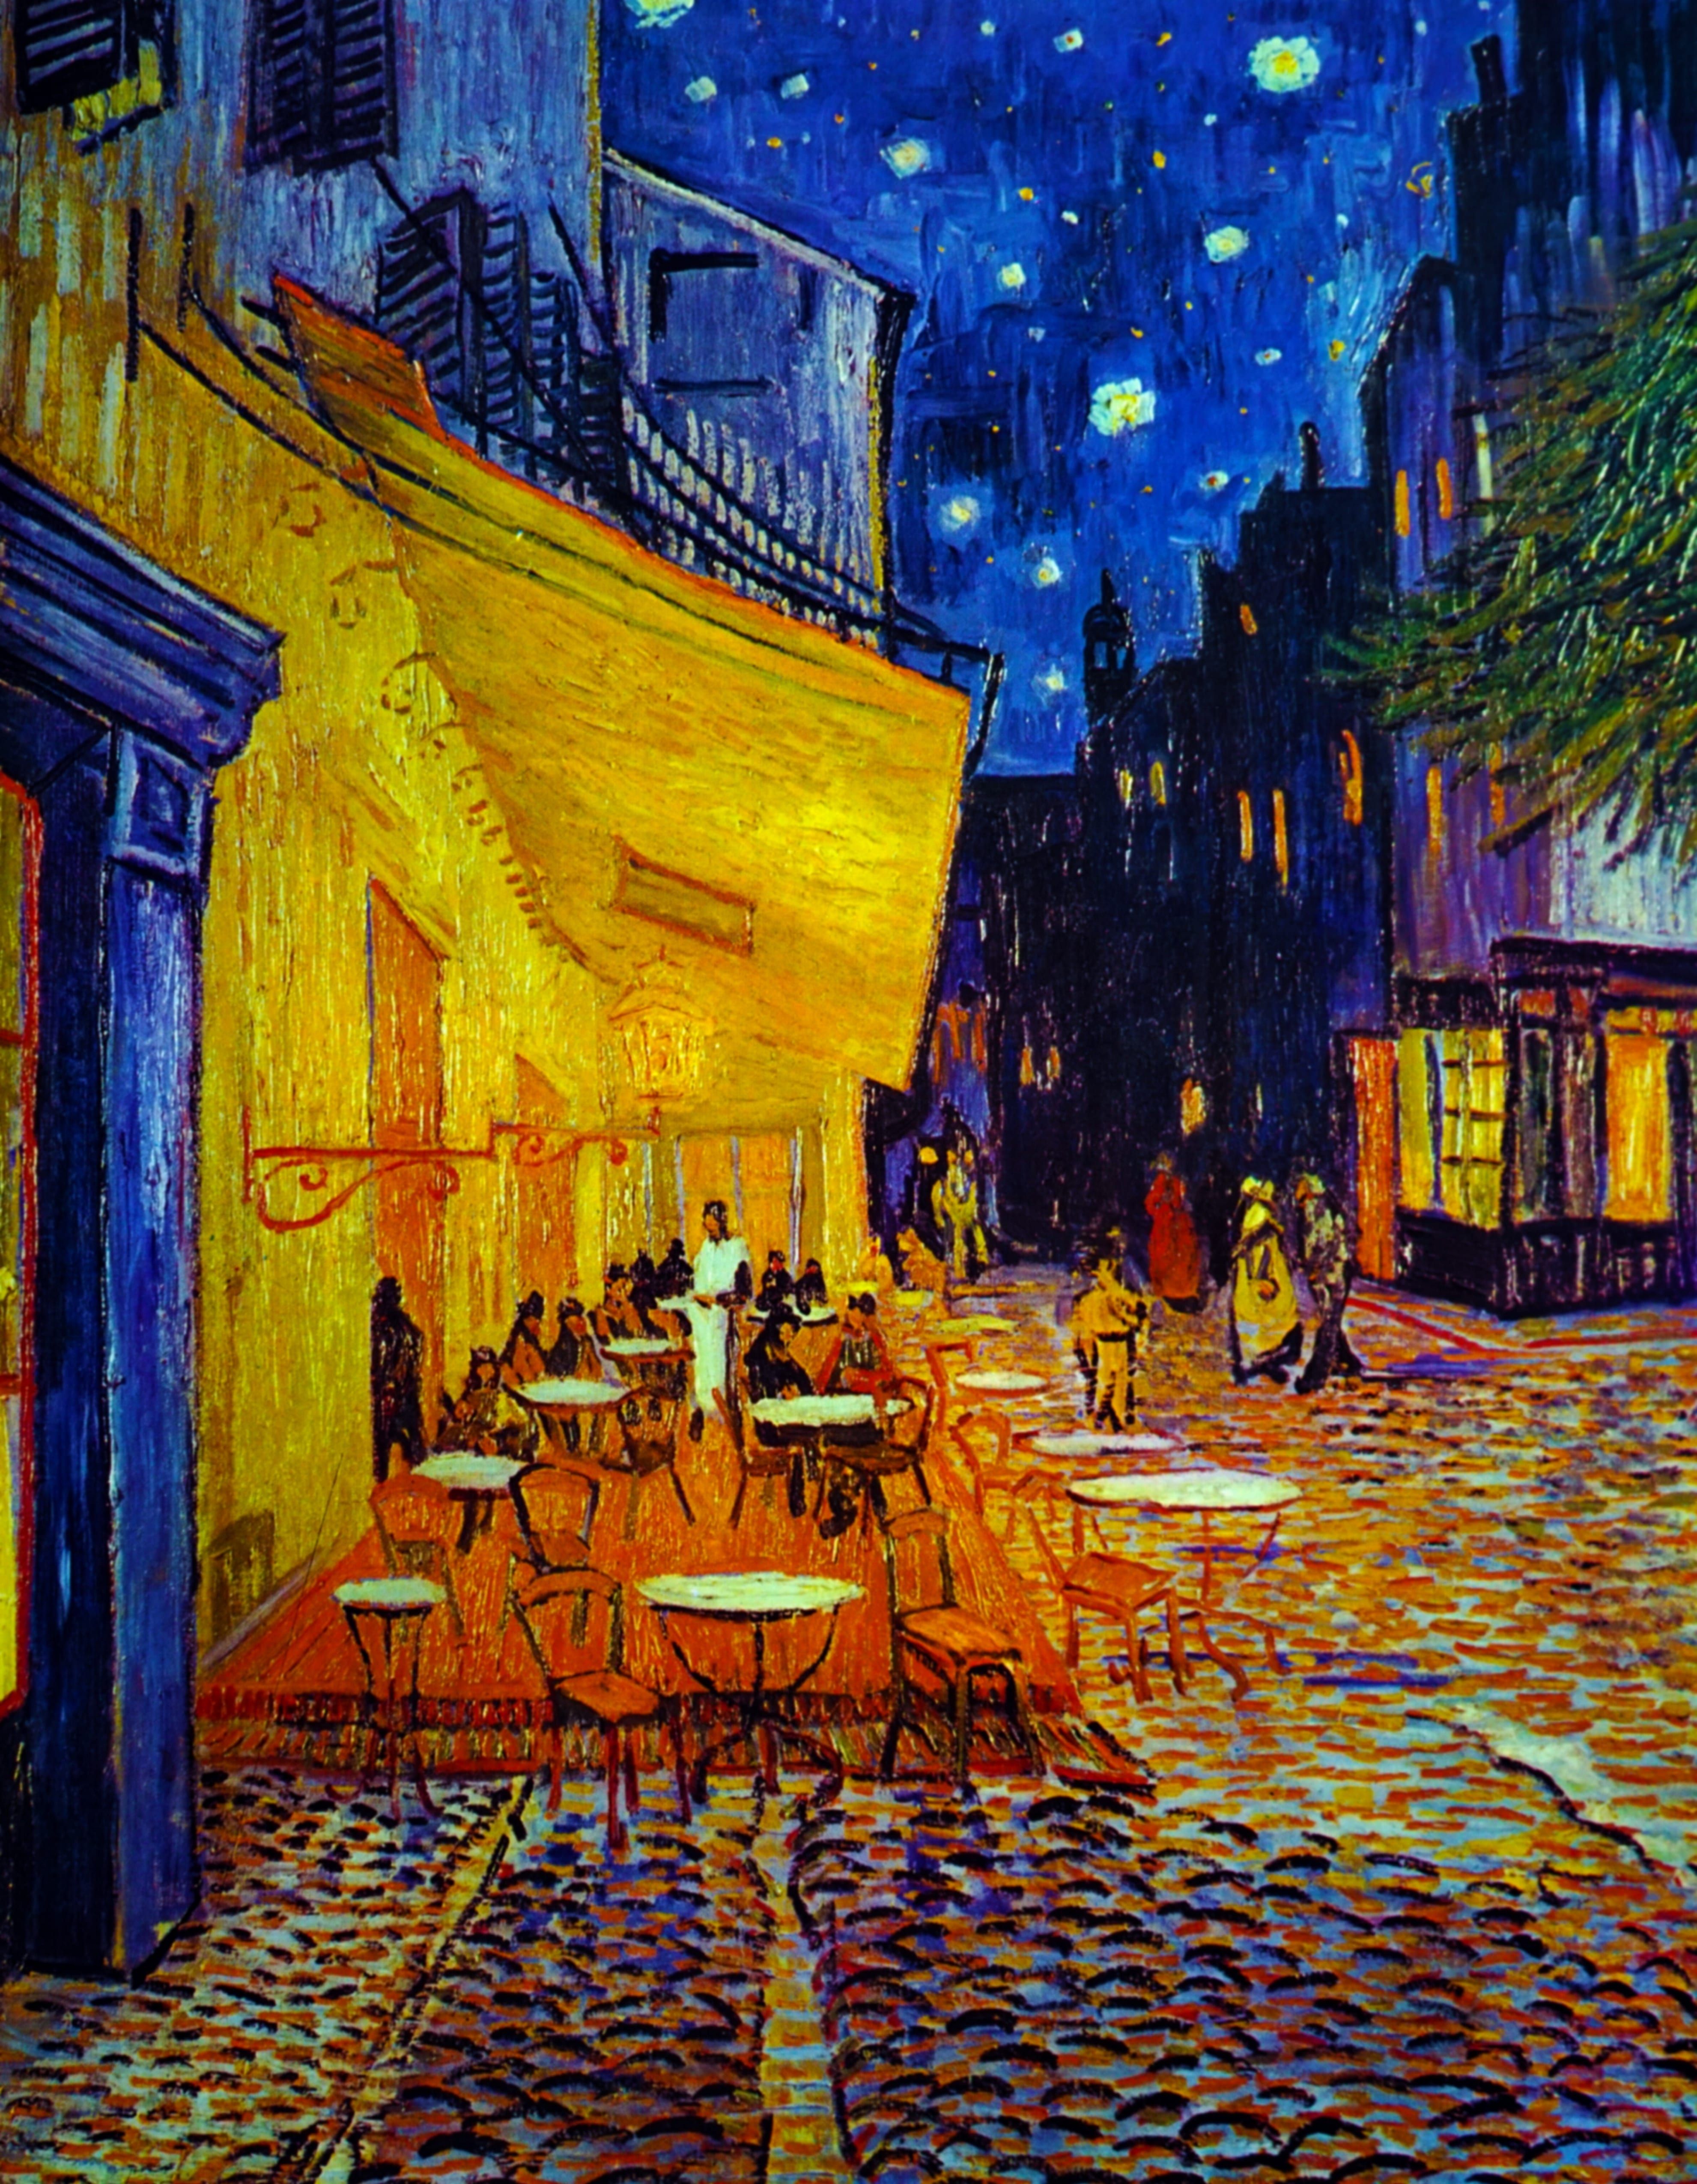 Van Gogh's 'Cafe Terrace at Night' the Subject of Twitter Debate